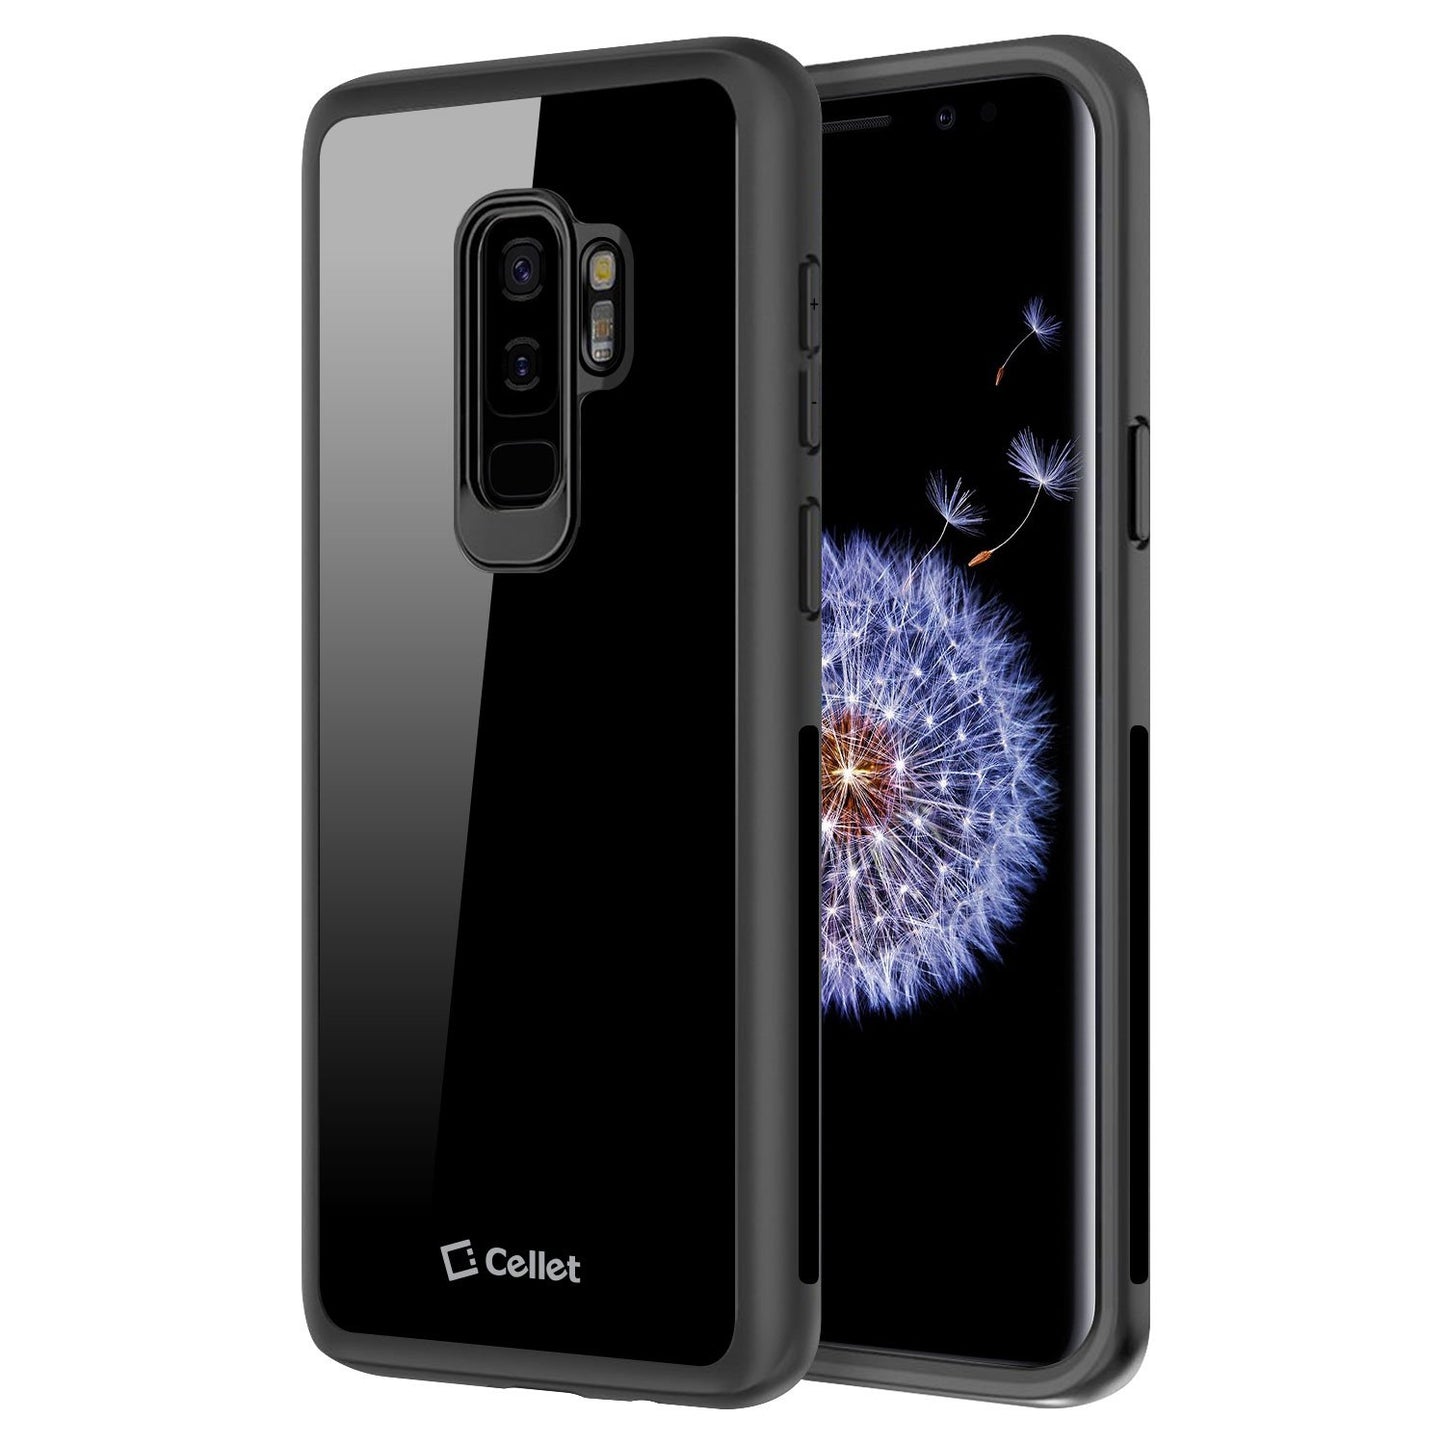 CCSAMS9P81BK - Heavy Duty Protection Slim Hard Case Cover - Clear- Galaxy S9 Plus